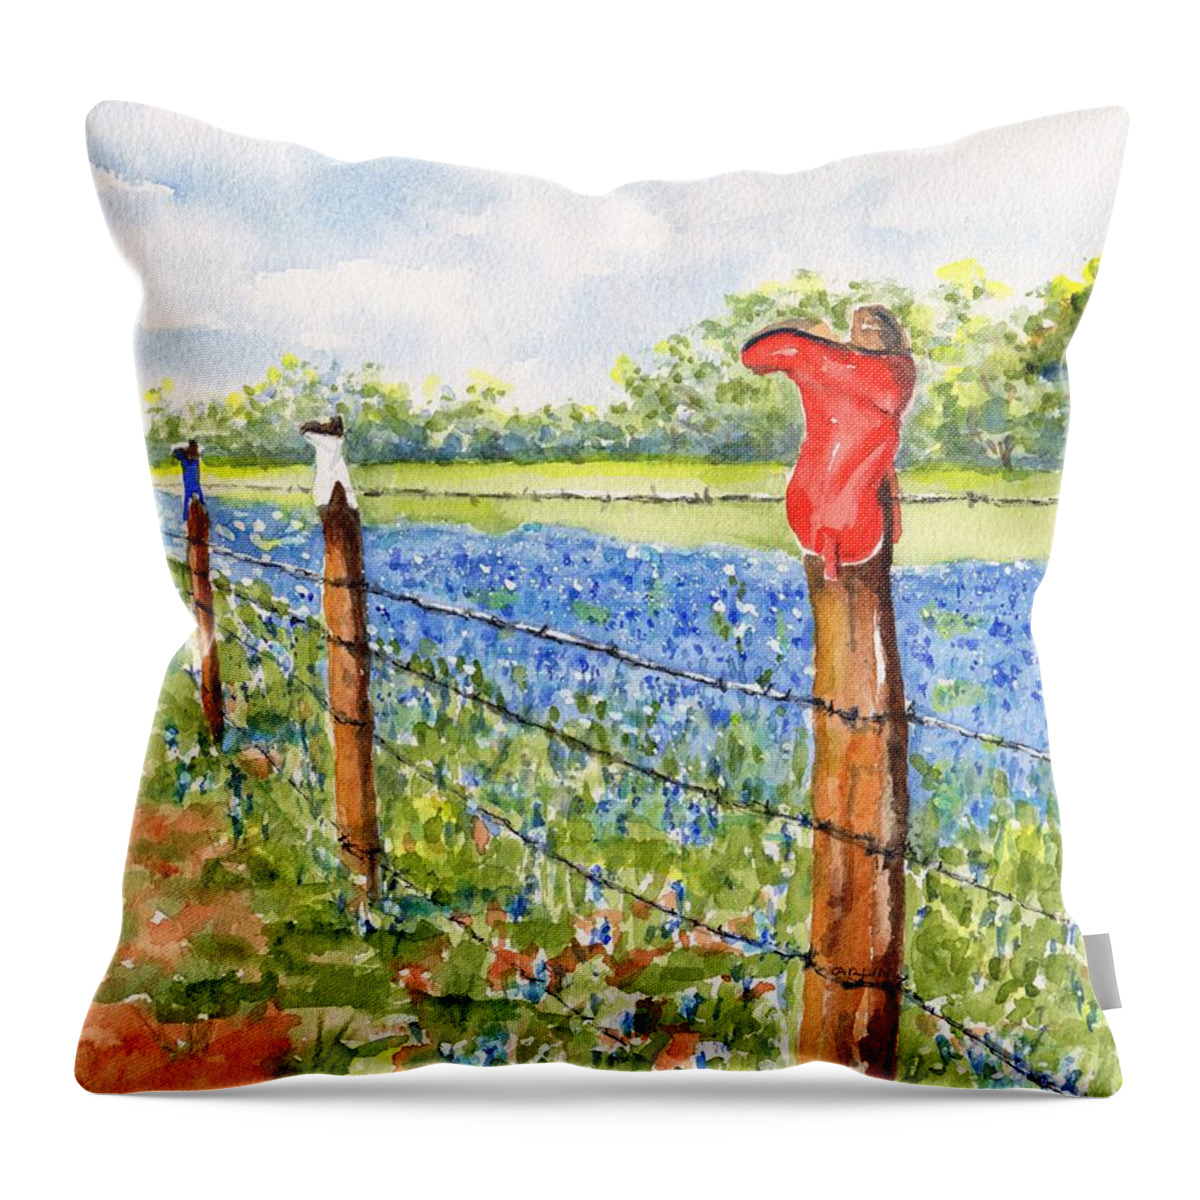 Texas Throw Pillow featuring the painting Texas Bluebonnets Boot Fence by Carlin Blahnik CarlinArtWatercolor